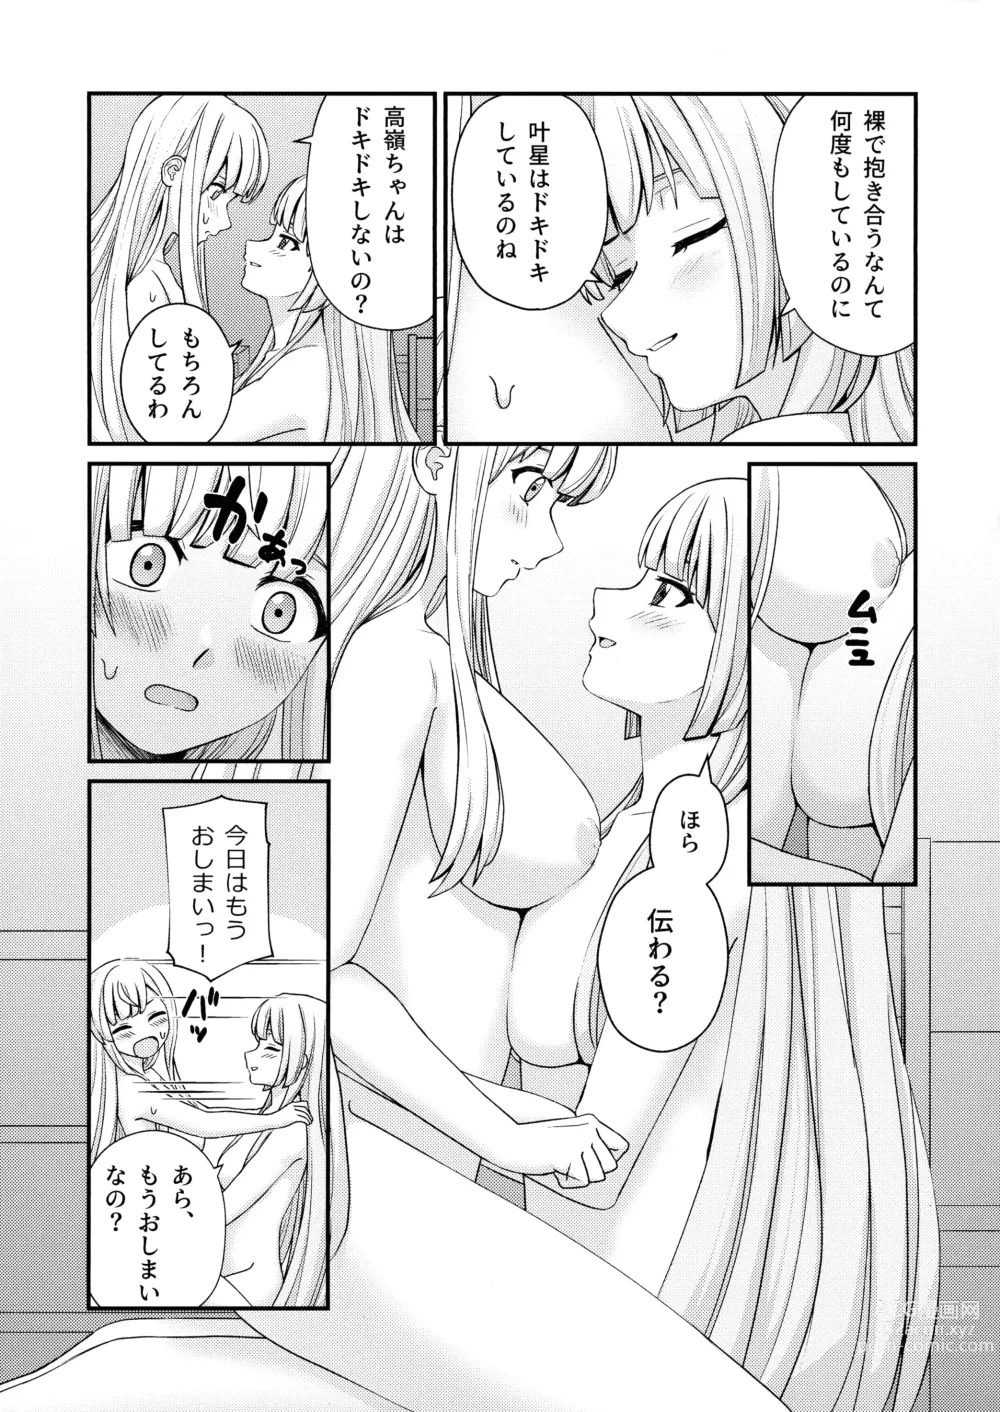 Page 9 of doujinshi 5days later